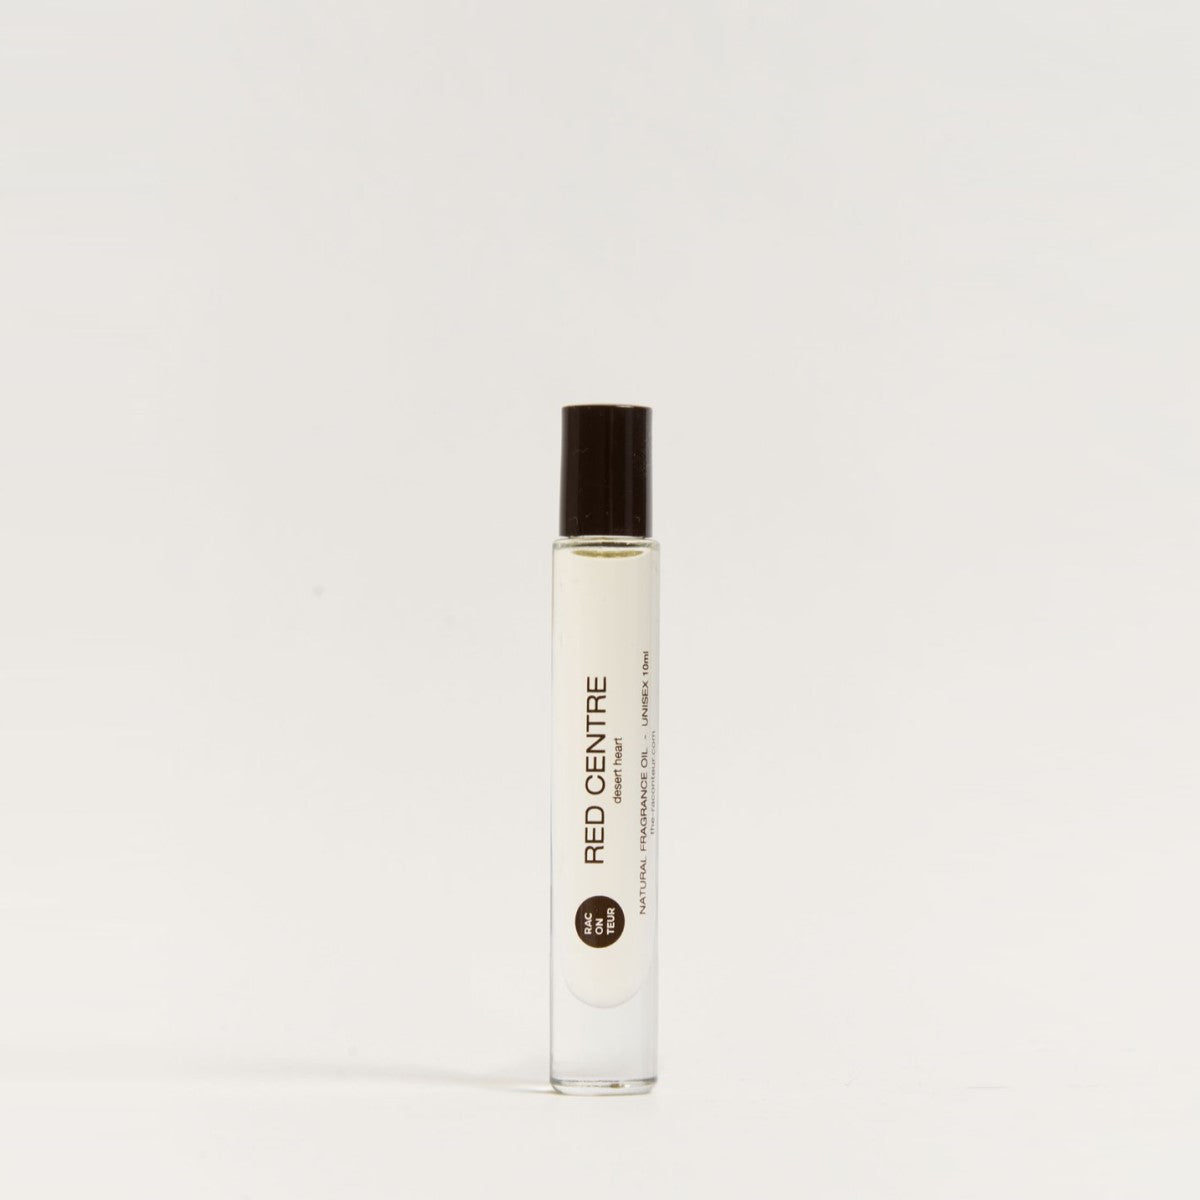 Raconteur 'Red Centre' Roll-On Fragrance